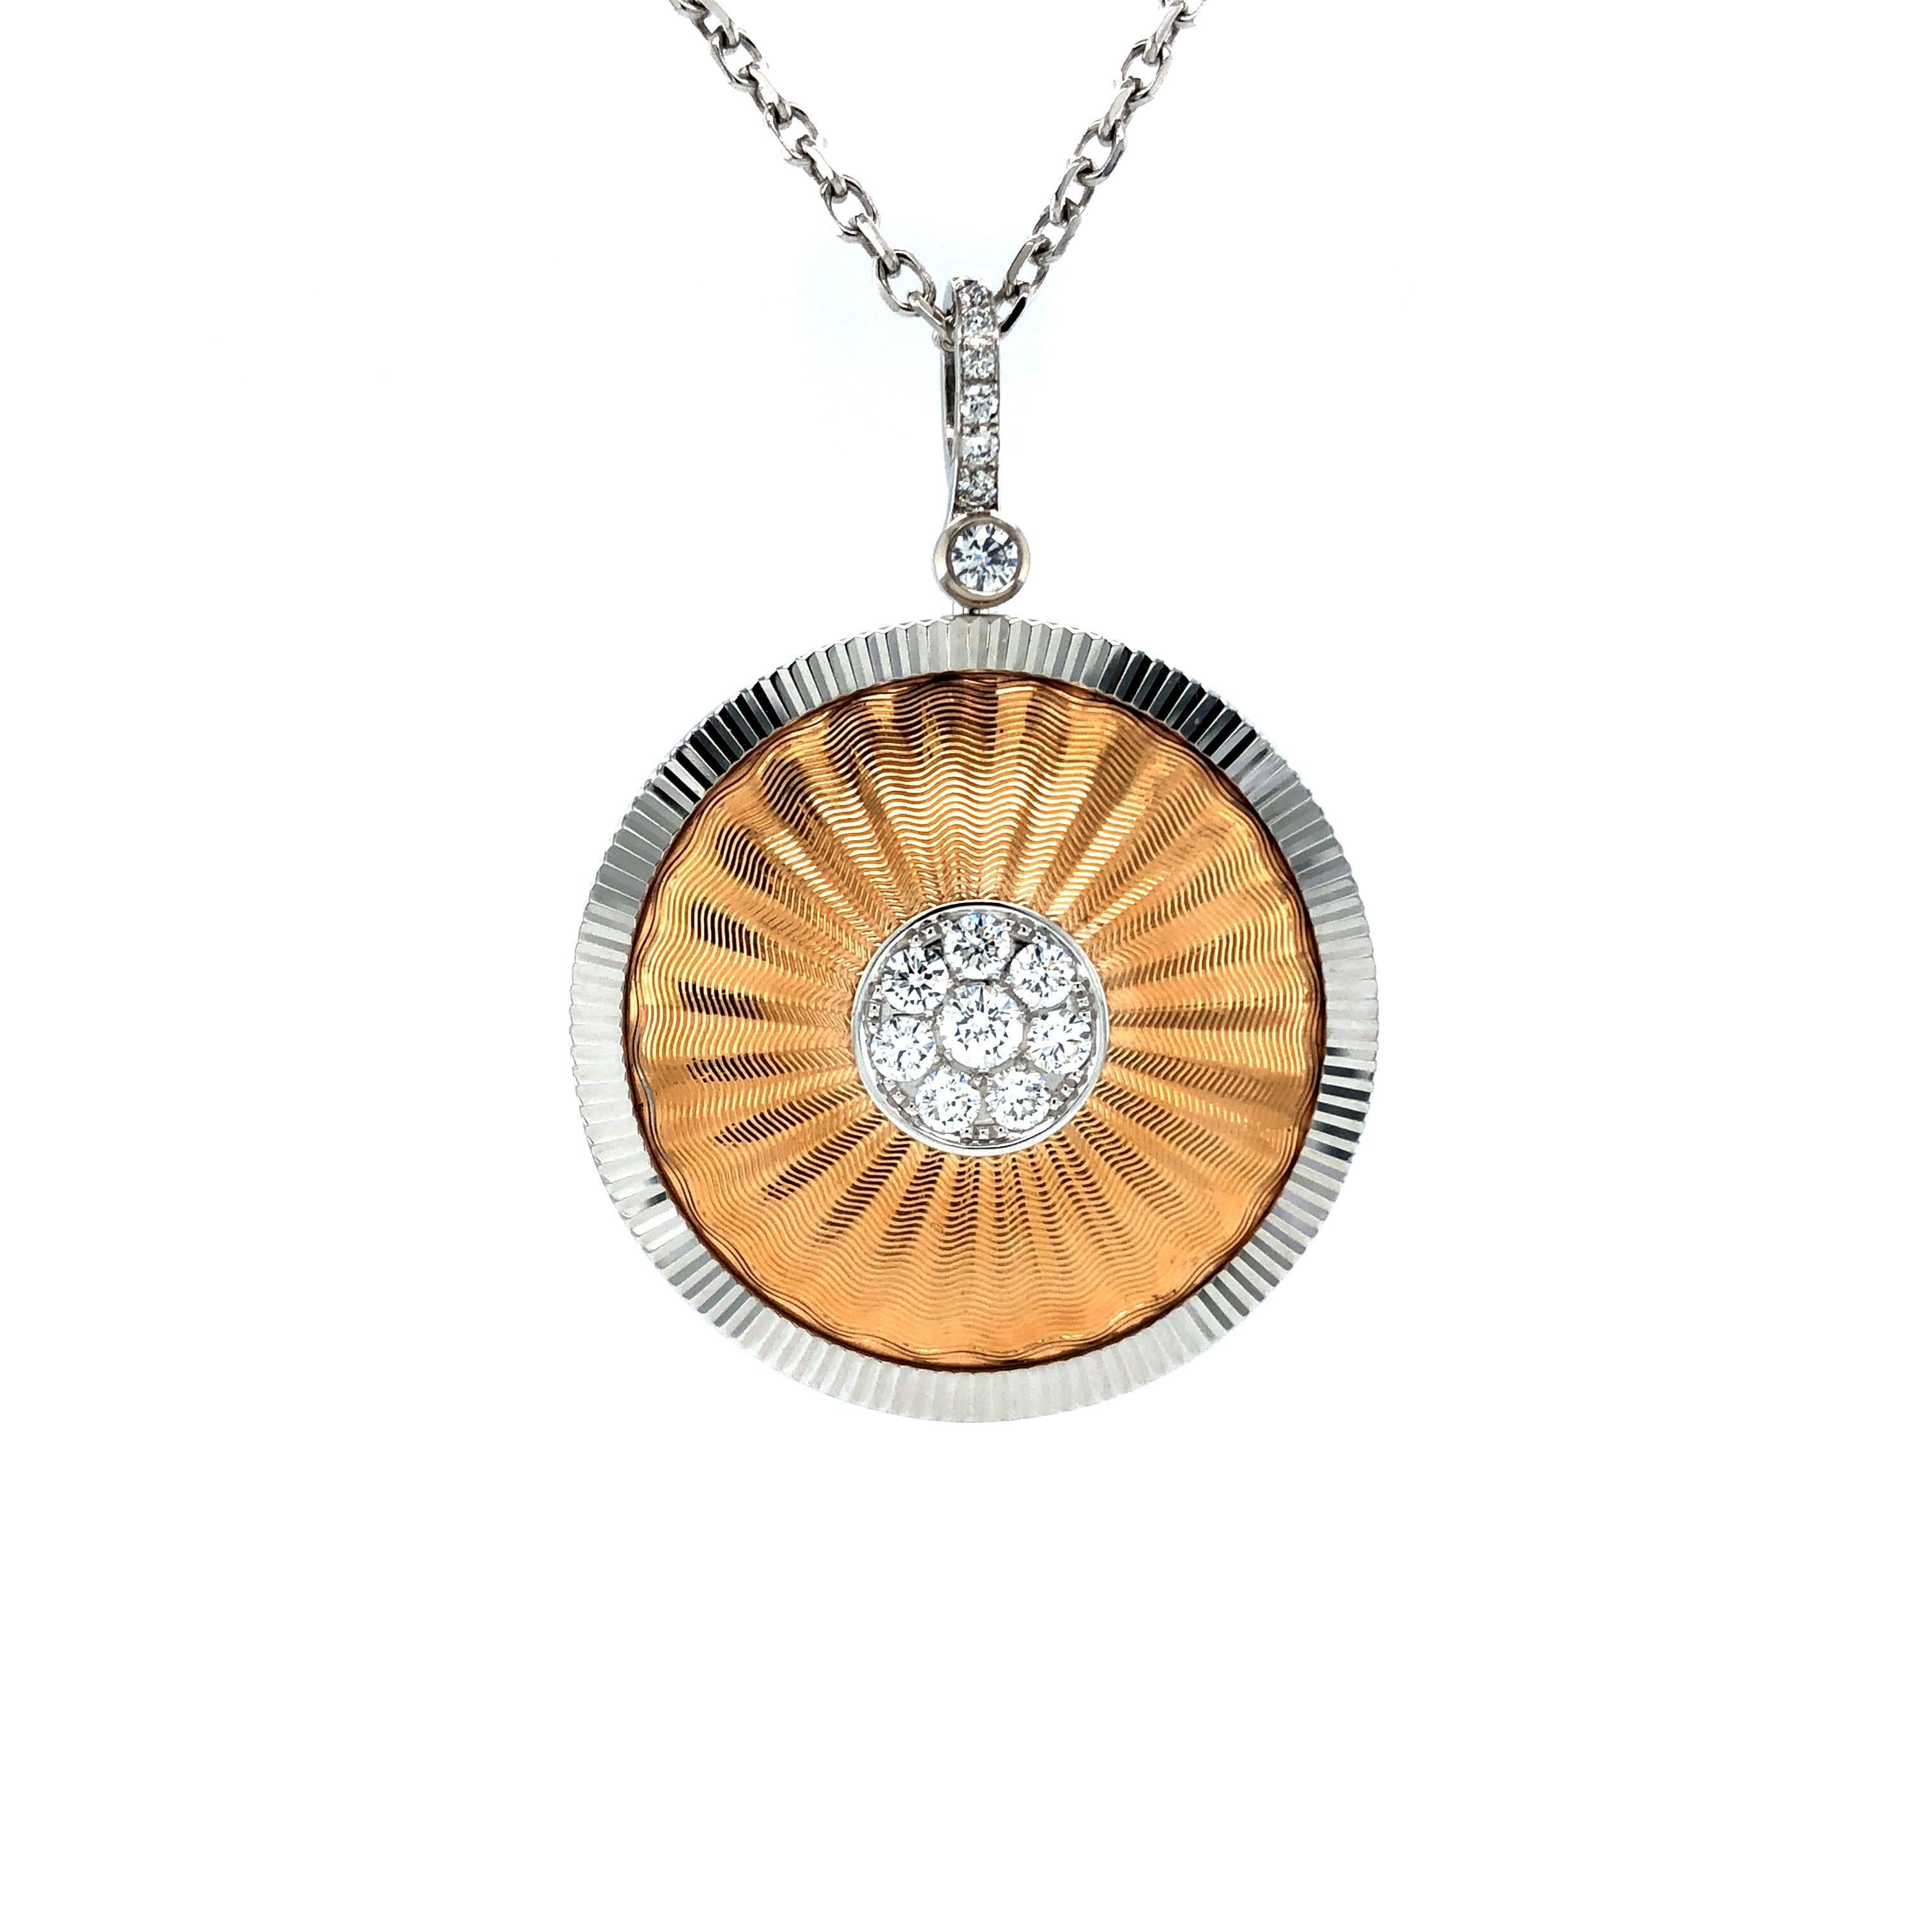 Victor Mayer round pendant, Opera collection, 18k white gold rose gold, guilloche engraving by hand, 18 diamonds, total 0.58 ct, G VS, diameter 30 mm

About the creator Victor Mayer
Victor Mayer is internationally renowned for elegant timeless